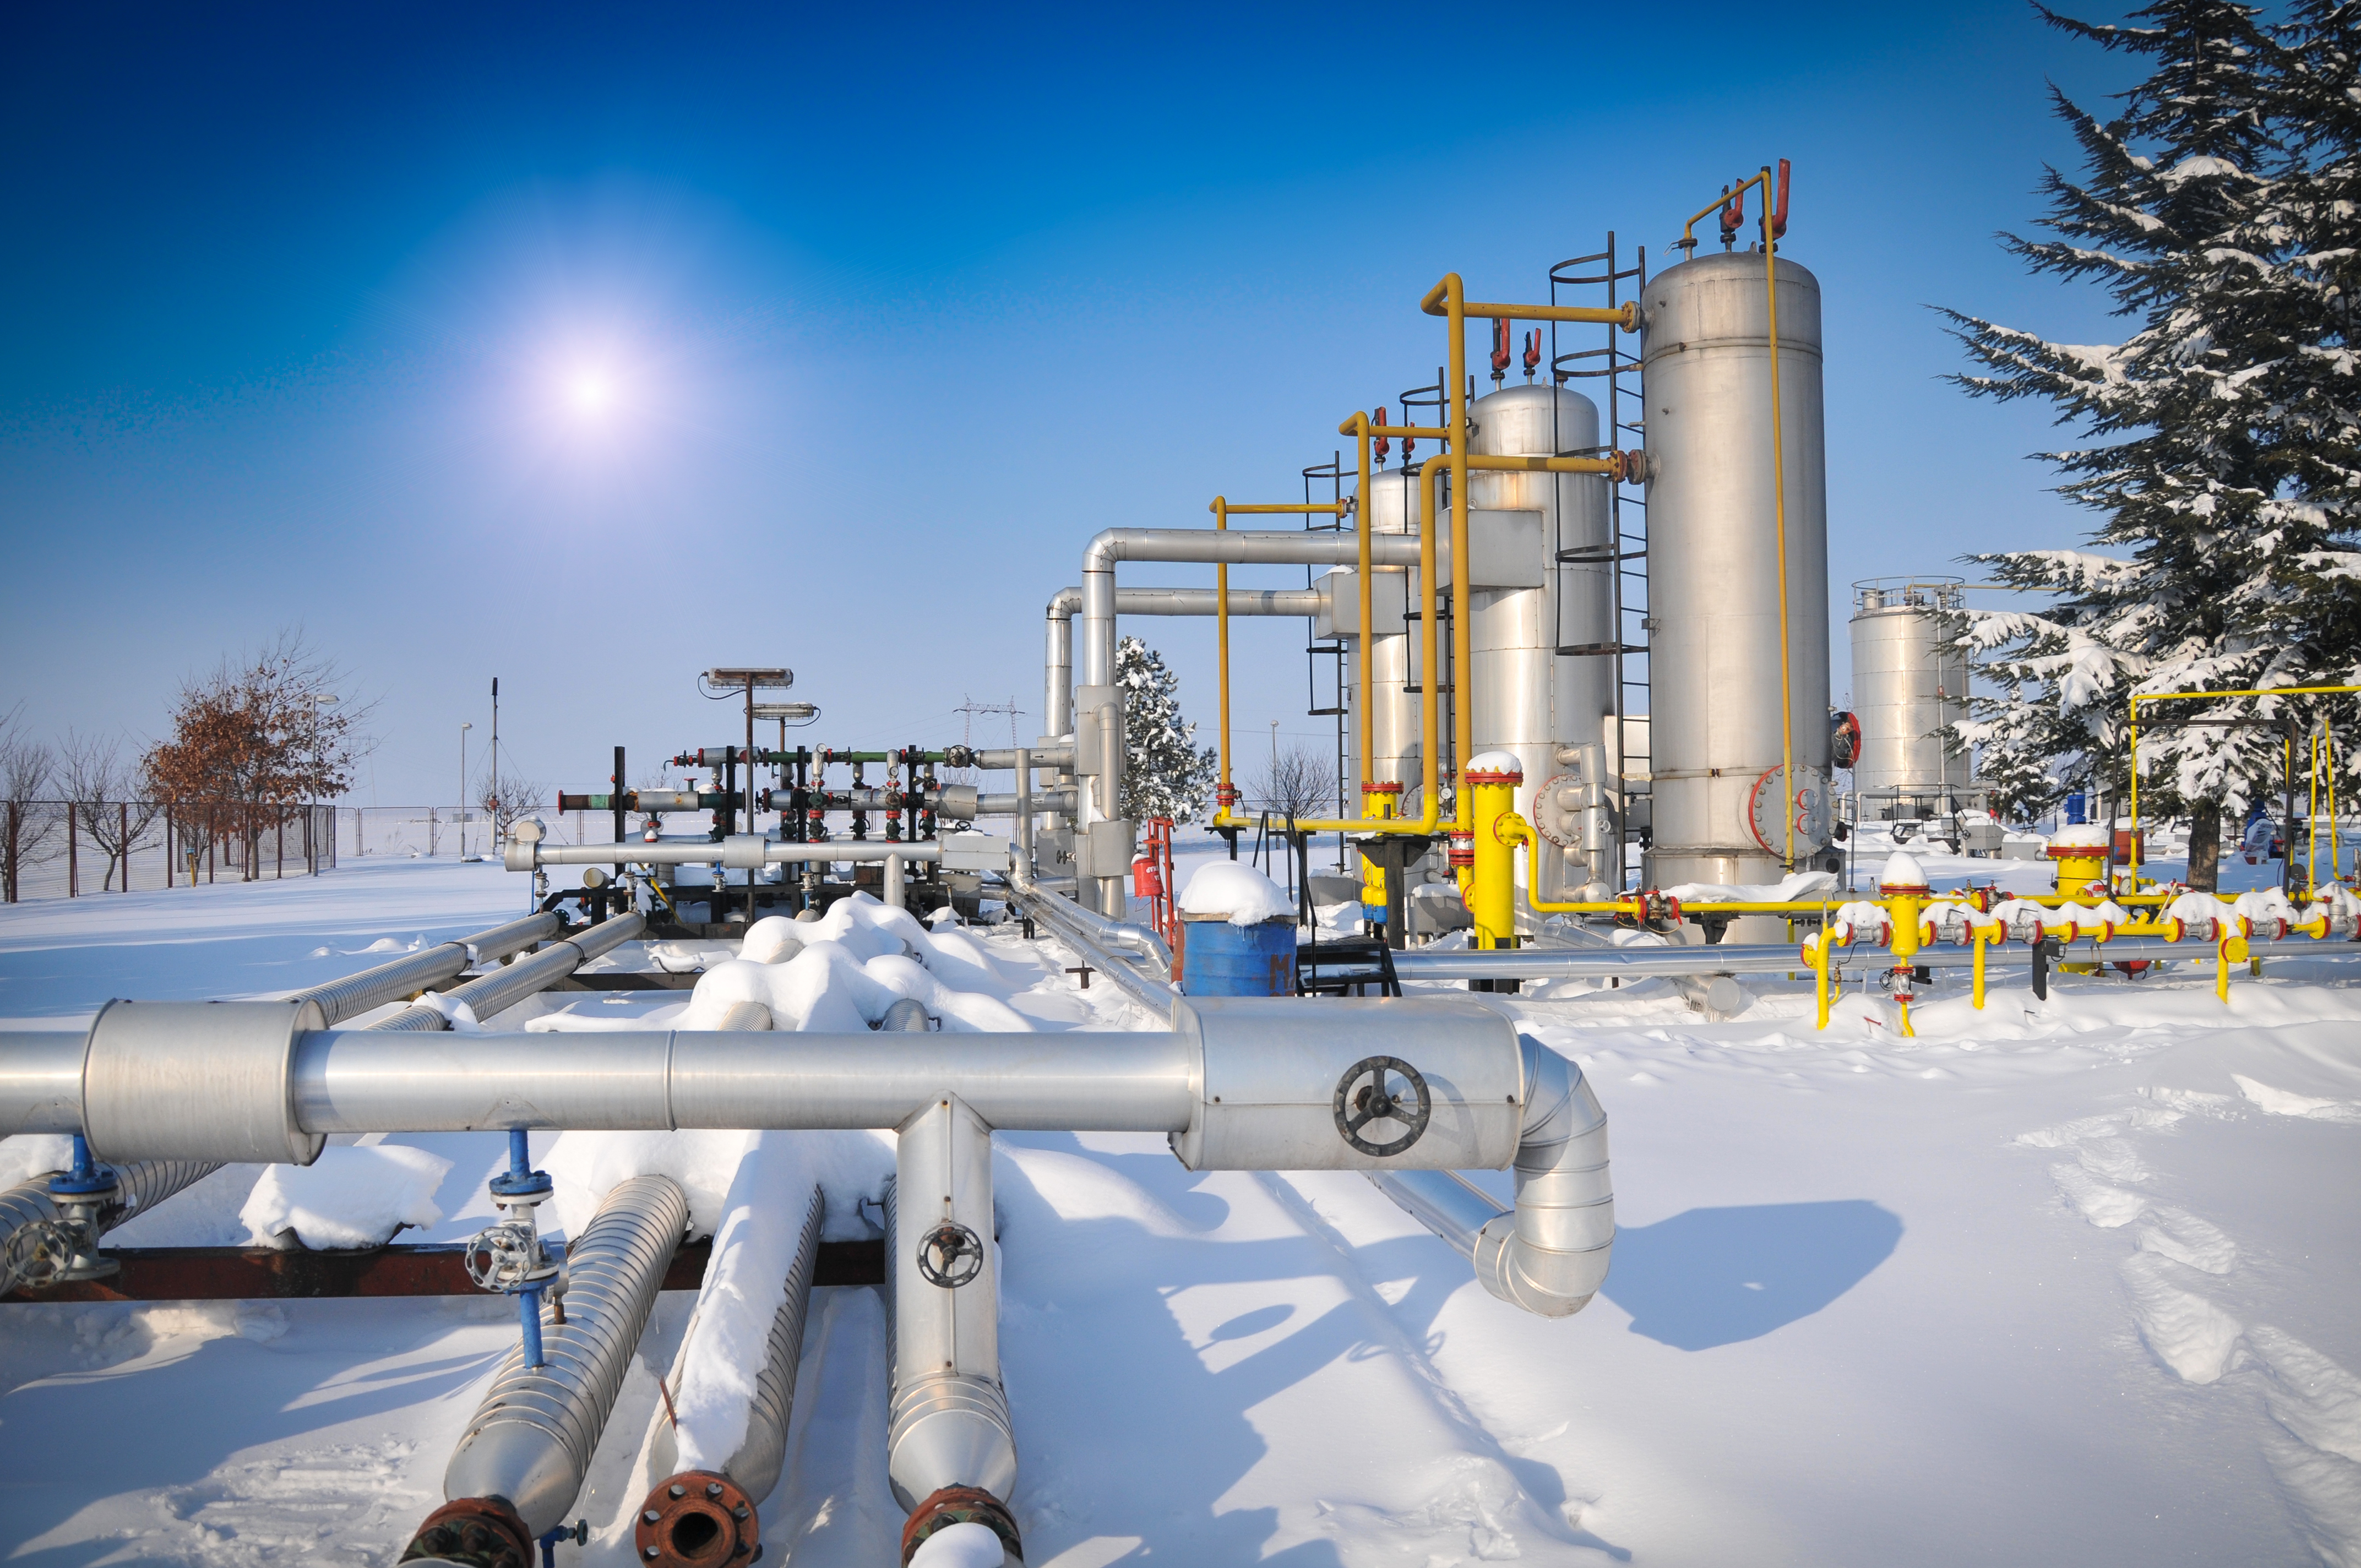 An image of pipelines in the snow